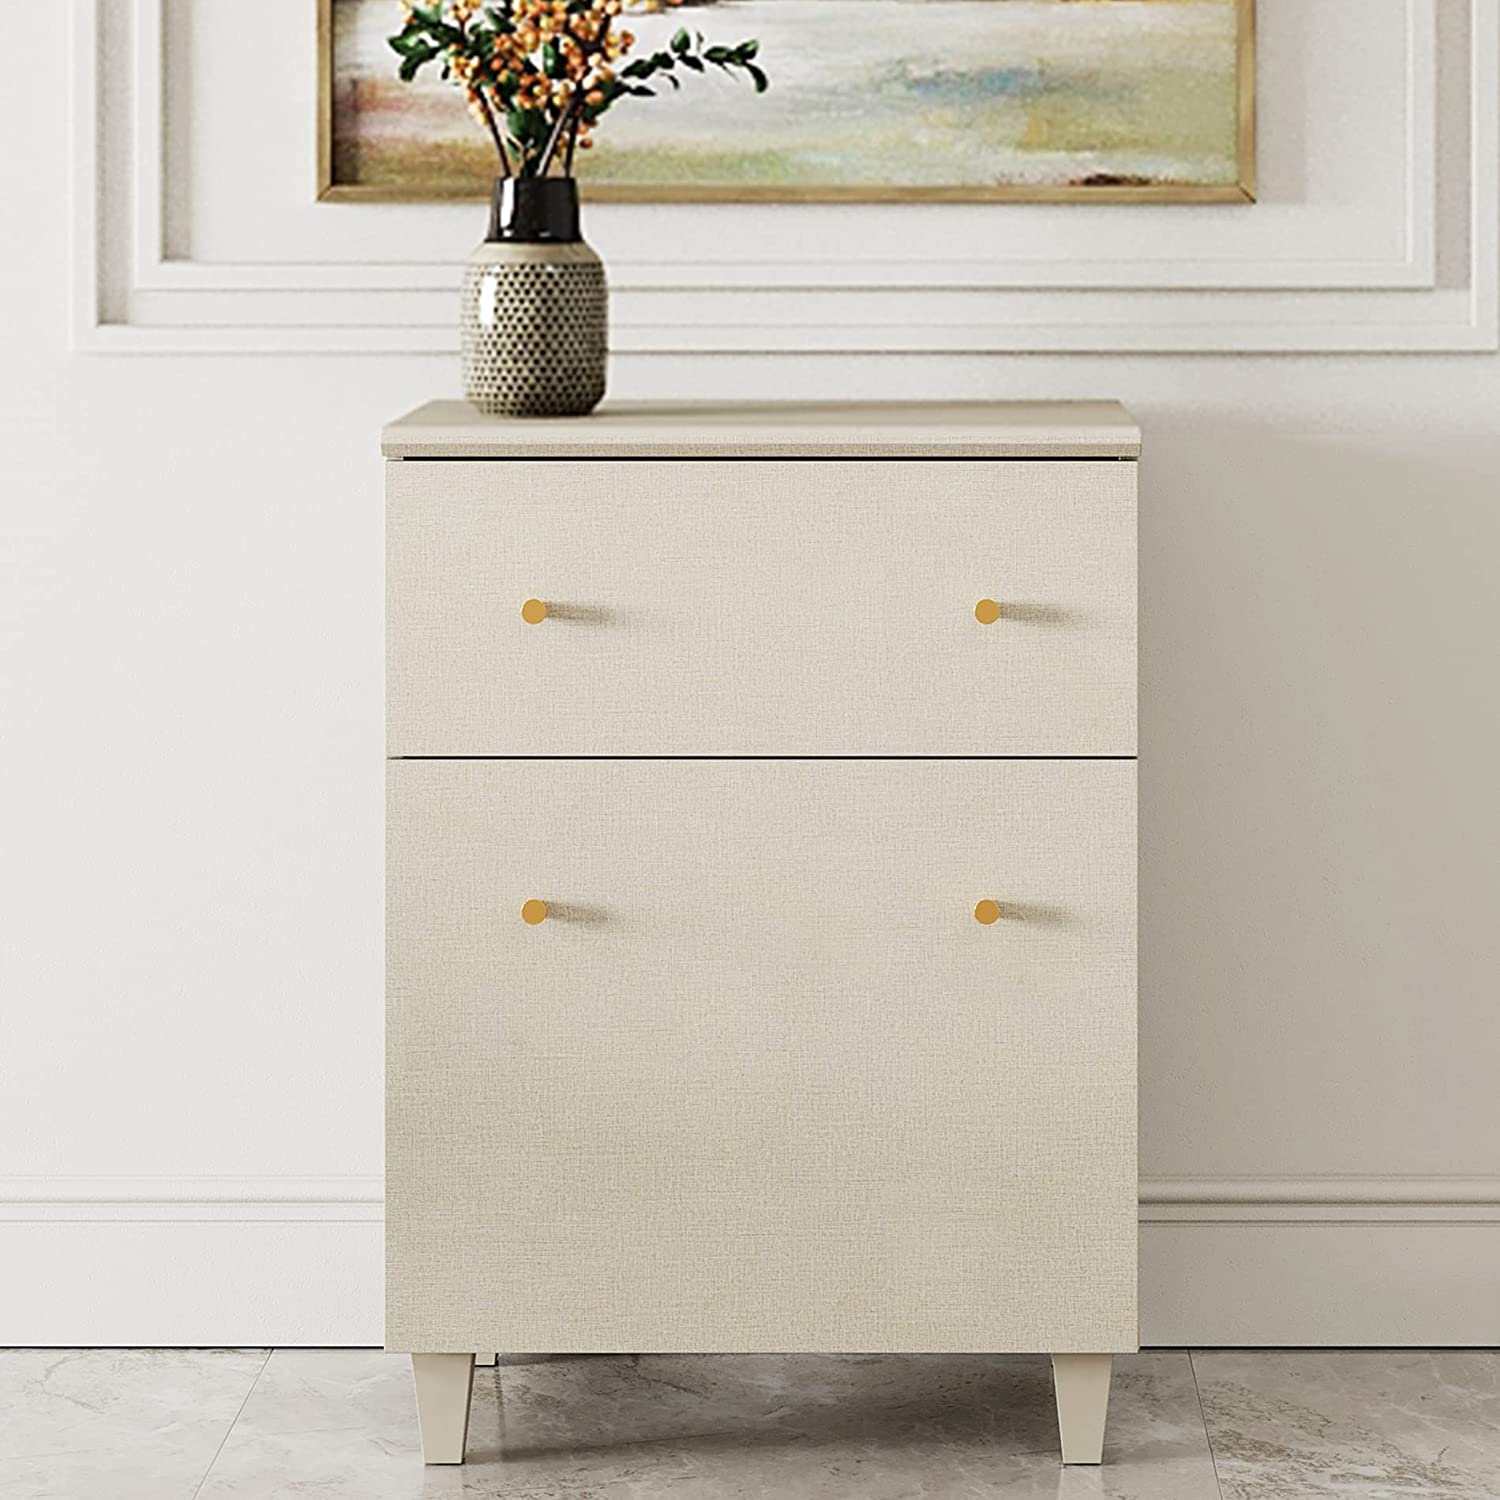 WAMPAT 32.4" H Storage Cabinet for Living Room,  Freestanding Wood Accent Cabinets for Dining Room, Entryway, Beige Fabric Texture Finish